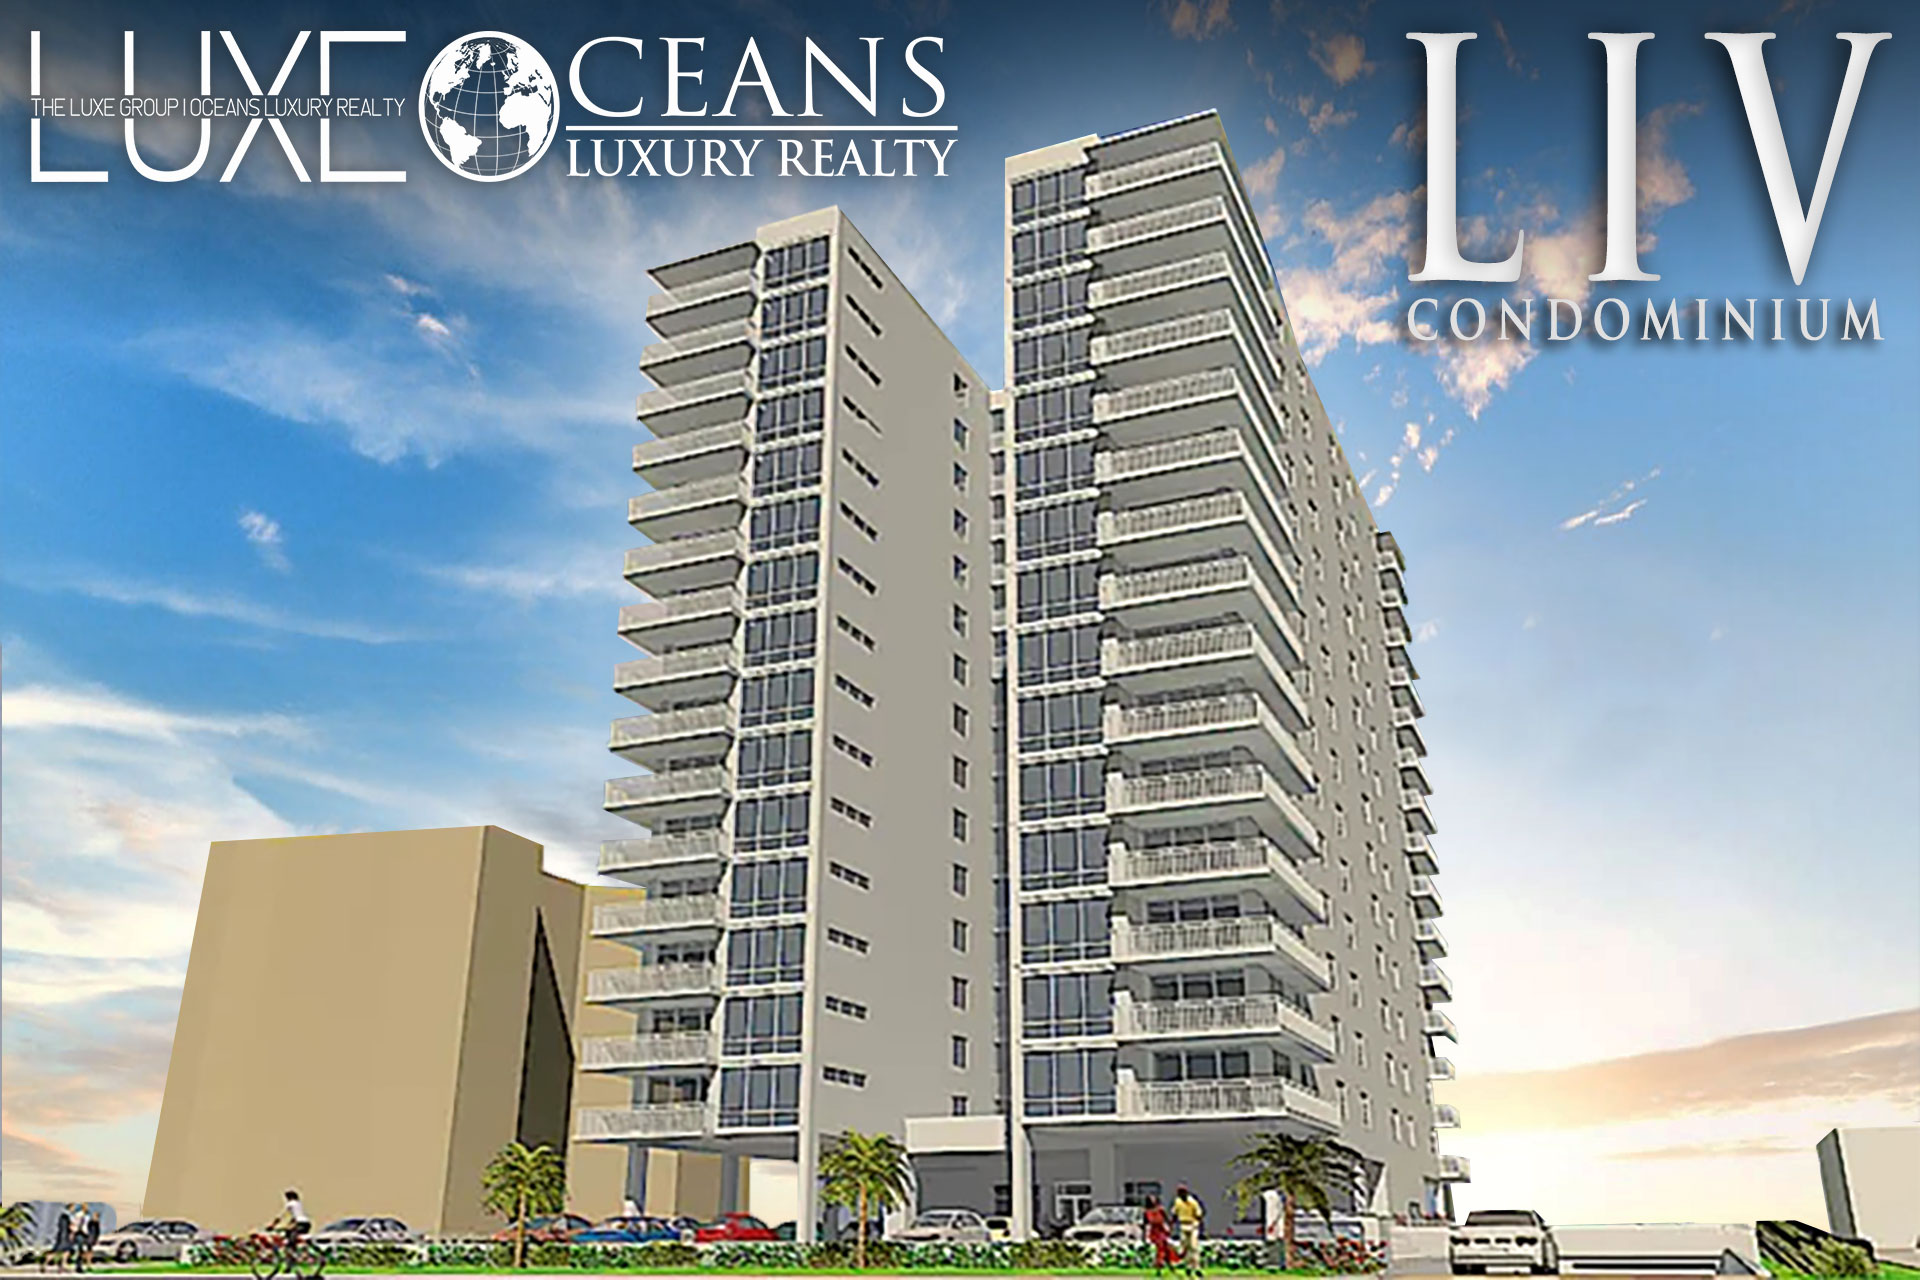 LIV Oceanfront Condos For Sale 3635 S Atlantic Ave Daytona Beach Shores FL 32118 The LUXE Group at Oceans Luxury Realty